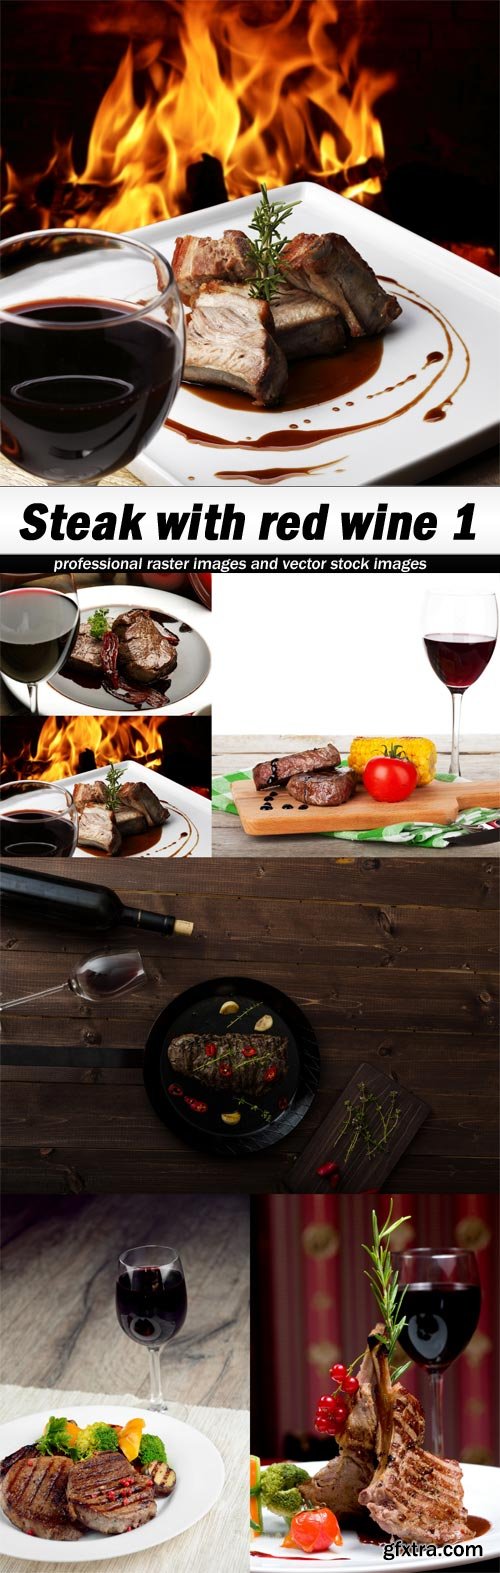 Steak with red wine 1-6xJPEGs